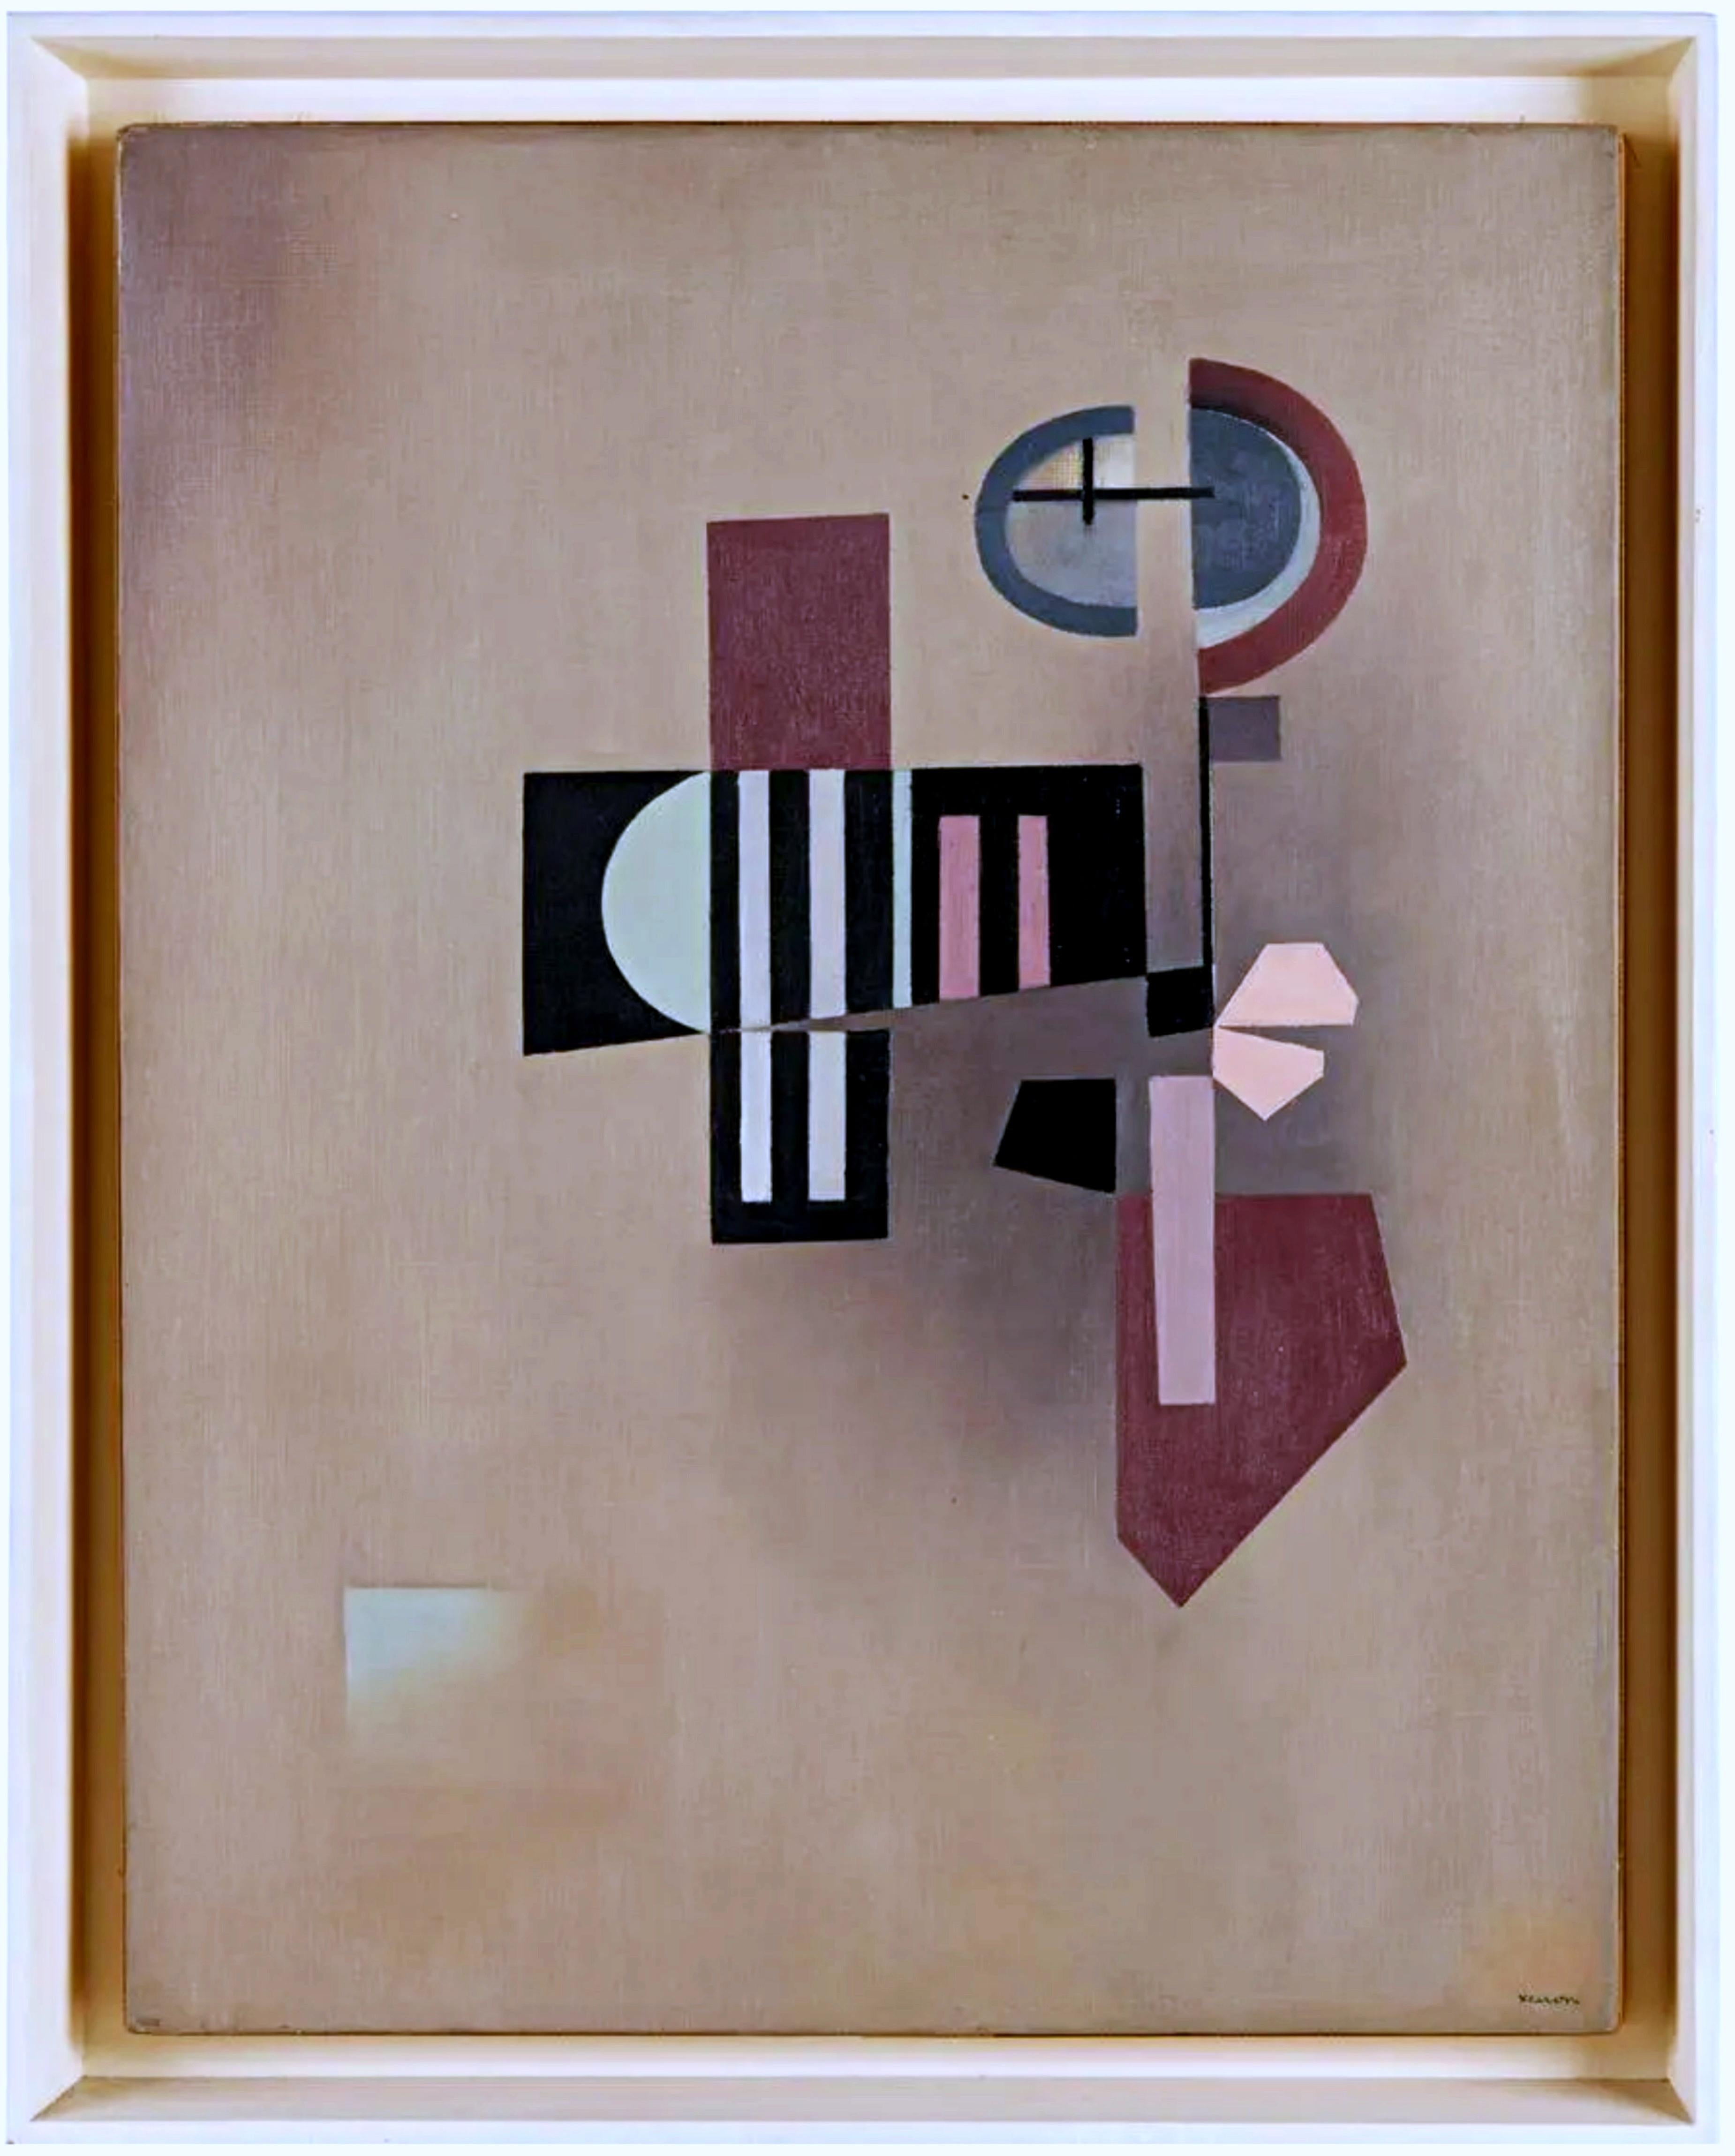 Jean Xceron Abstract Painting - Composition No. 257 (Ex-collection of the Solomon R. Guggenheim Museum w/ label)